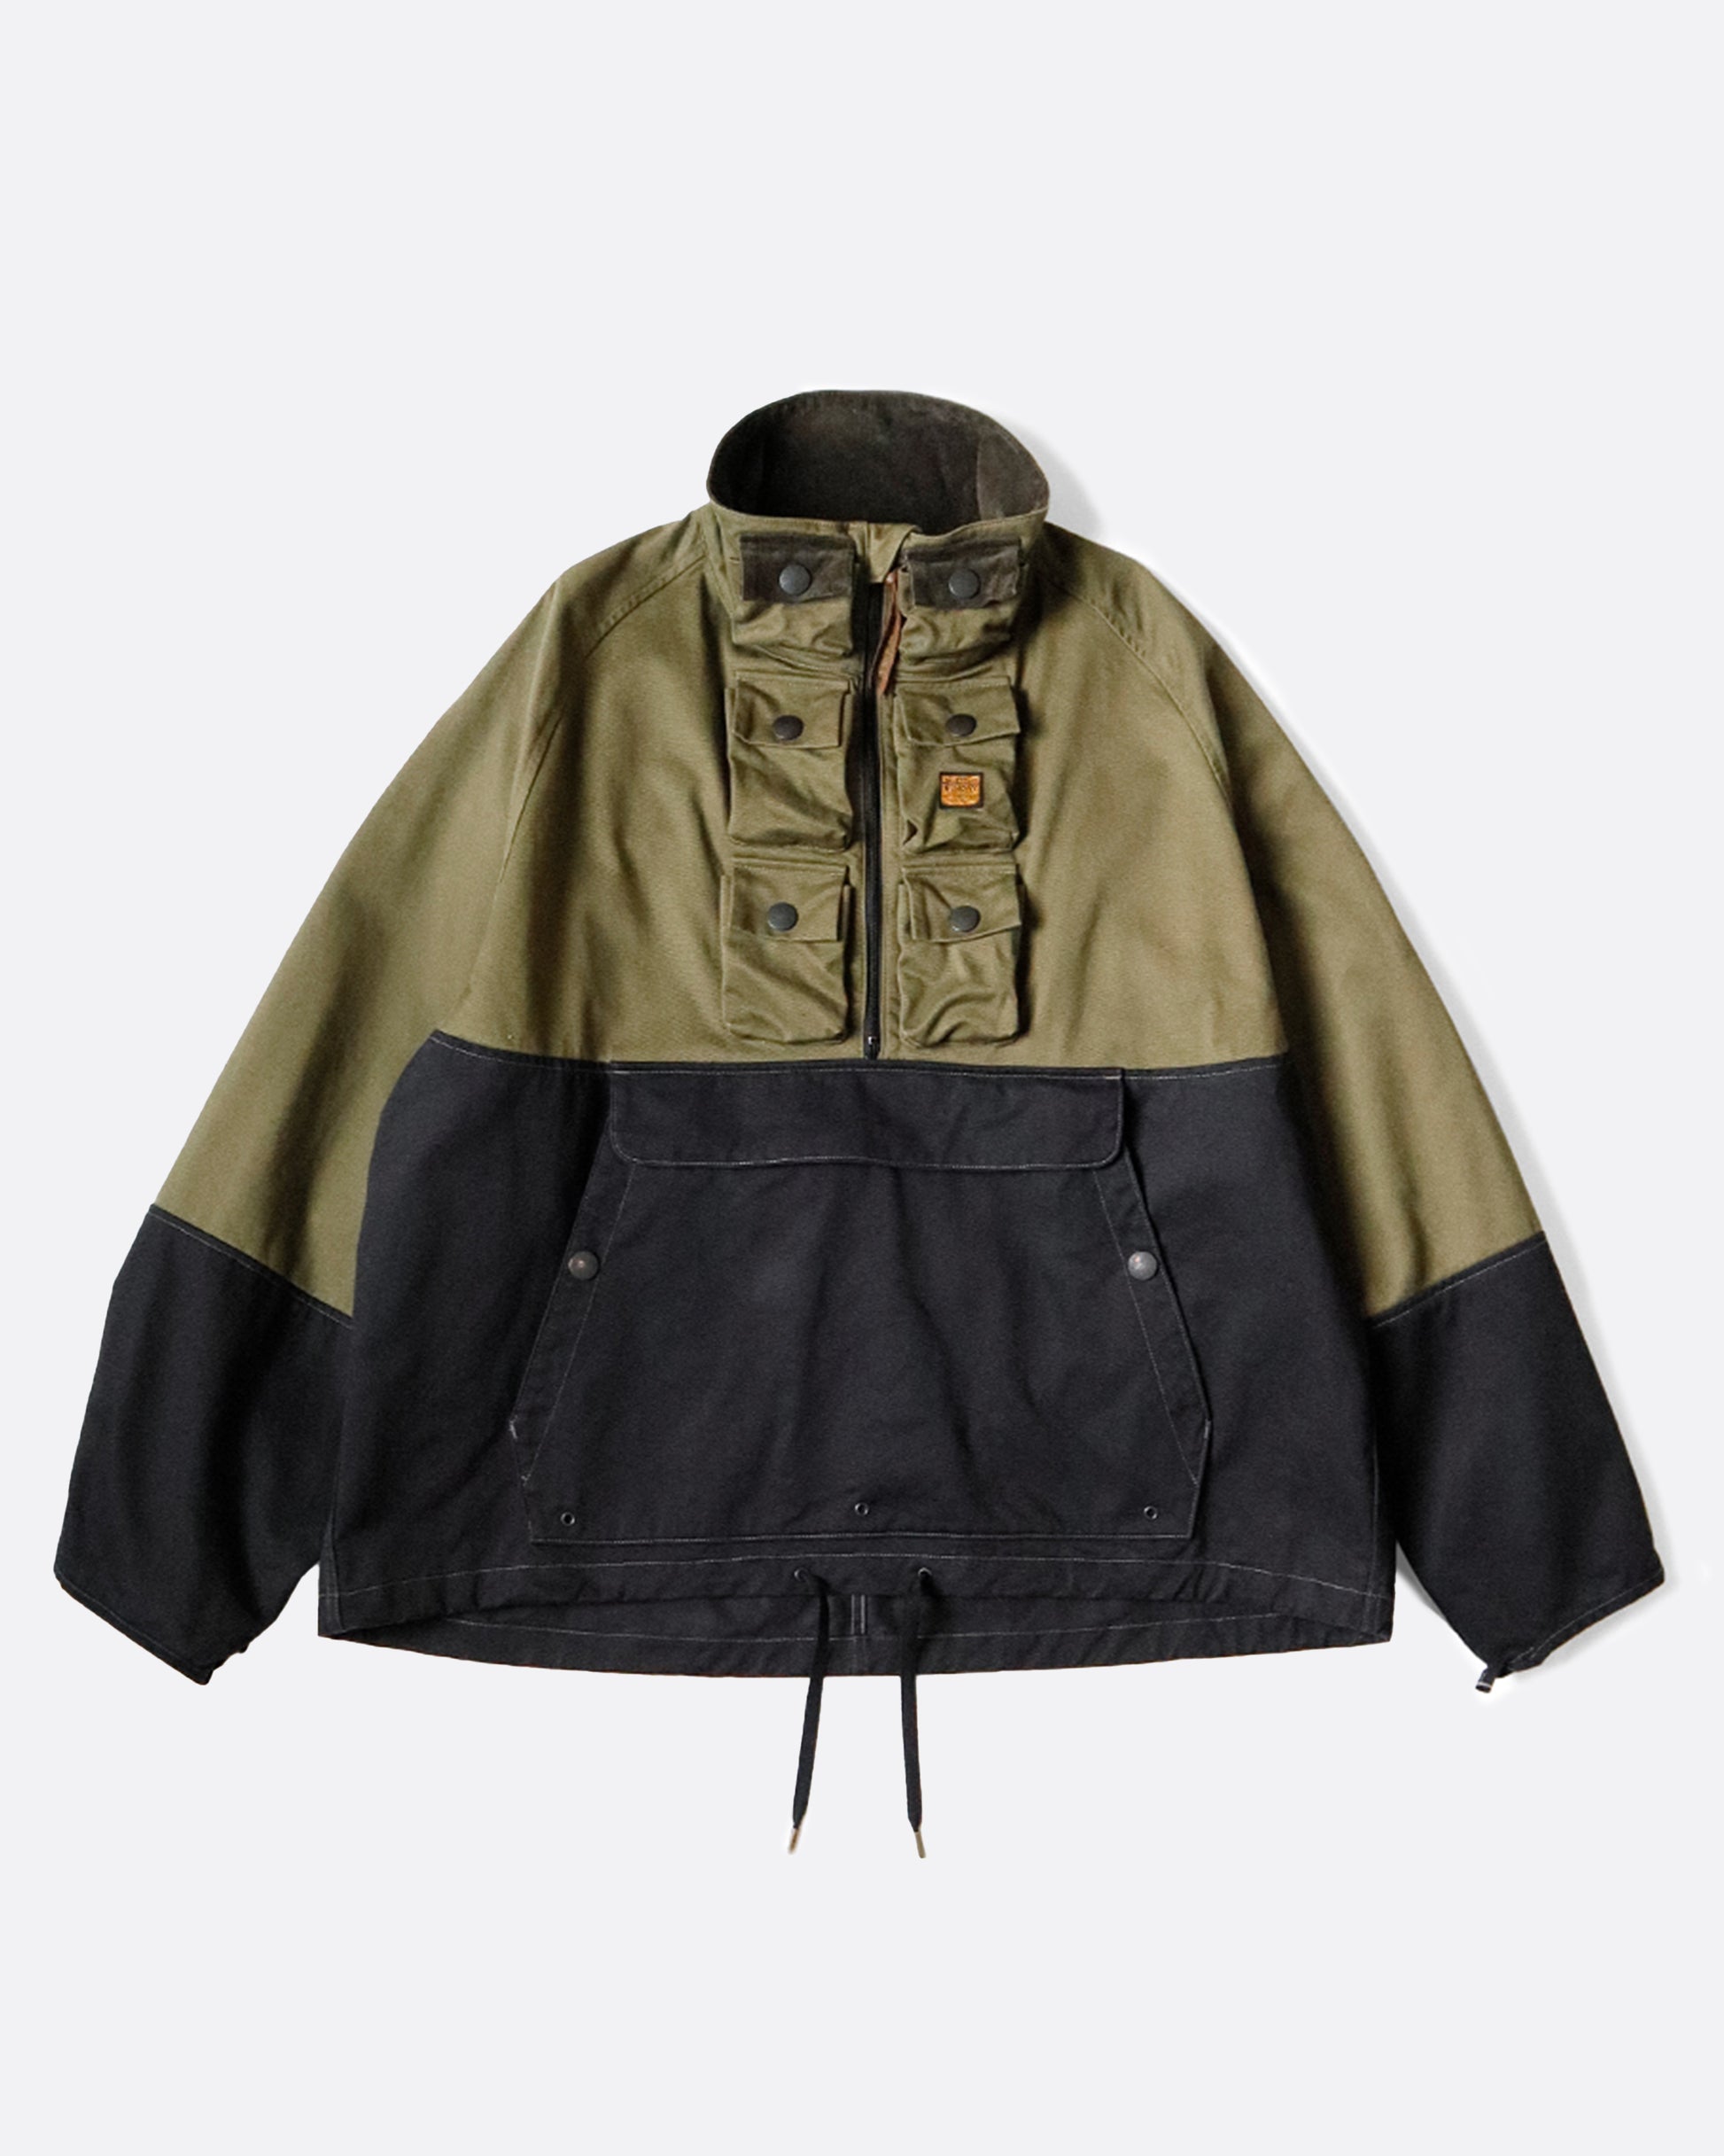 One of Kapital's beloved anoraks, made from two colors of cotton chino material with six mini pockets around the neck and a zip pocket with a flap on the front.